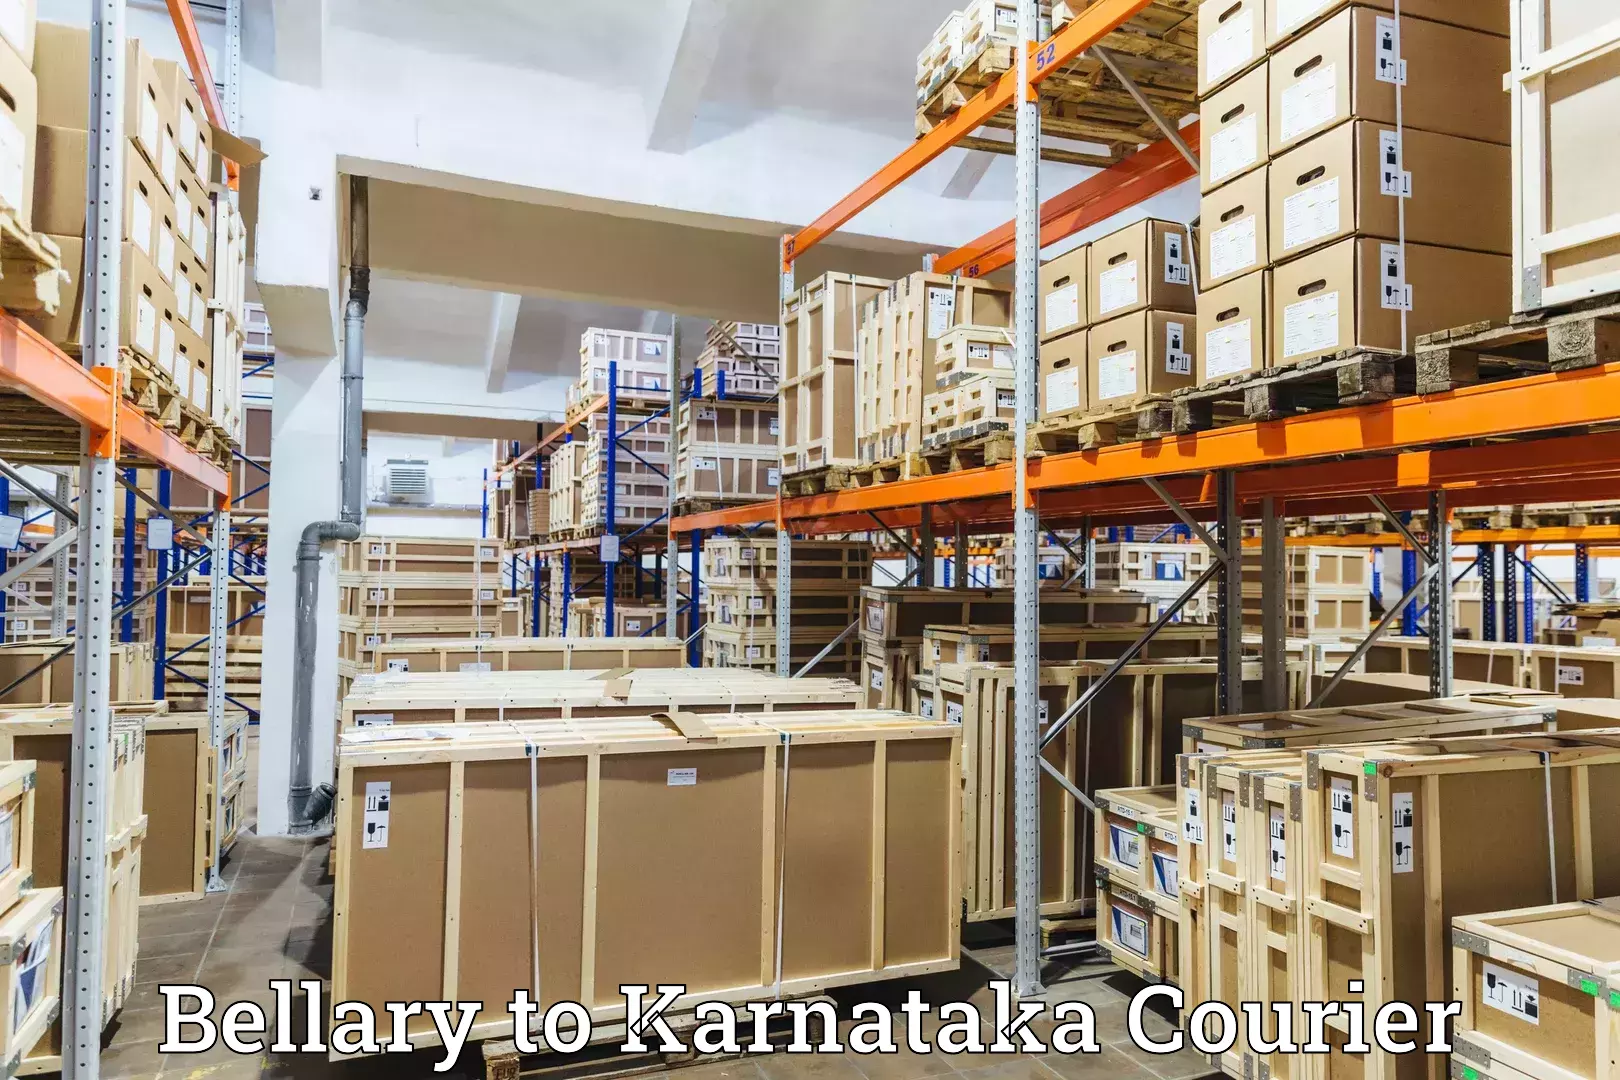 Global shipping solutions Bellary to Mysore University